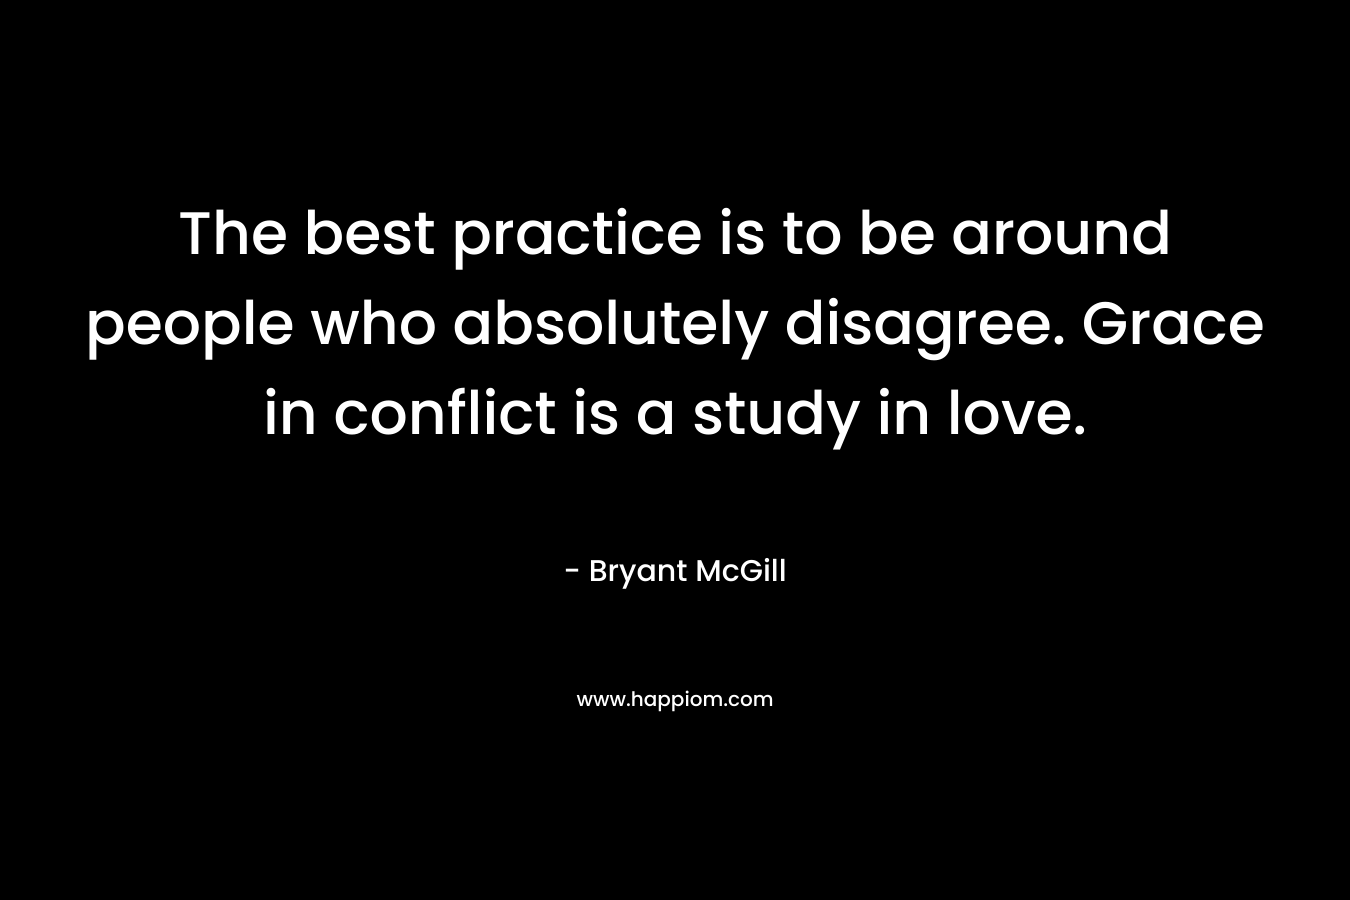 The best practice is to be around people who absolutely disagree. Grace in conflict is a study in love.